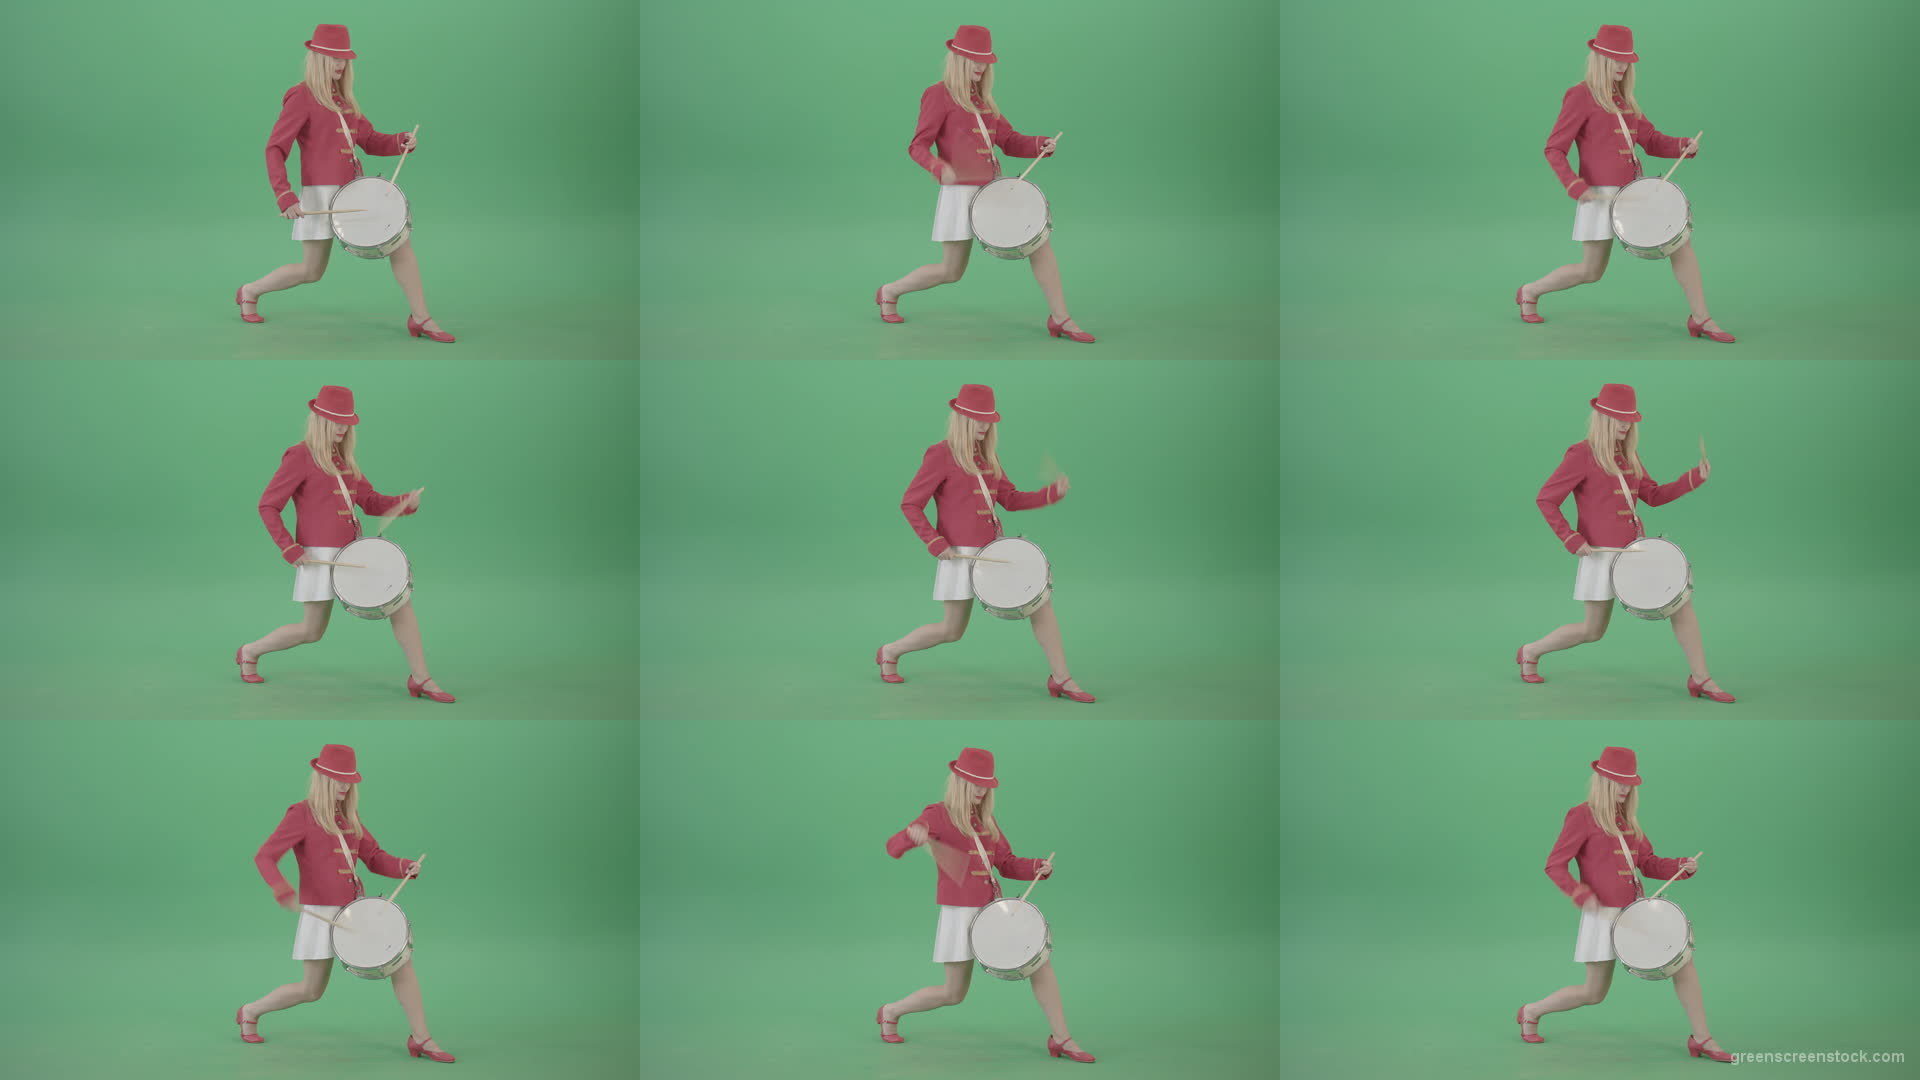 Blonde-Girl-in-Red-Uniform-making-beats-on-music-drum-instrument-in-active-pose-on-green-screen-4K-Video-Footage-1920 Green Screen Stock